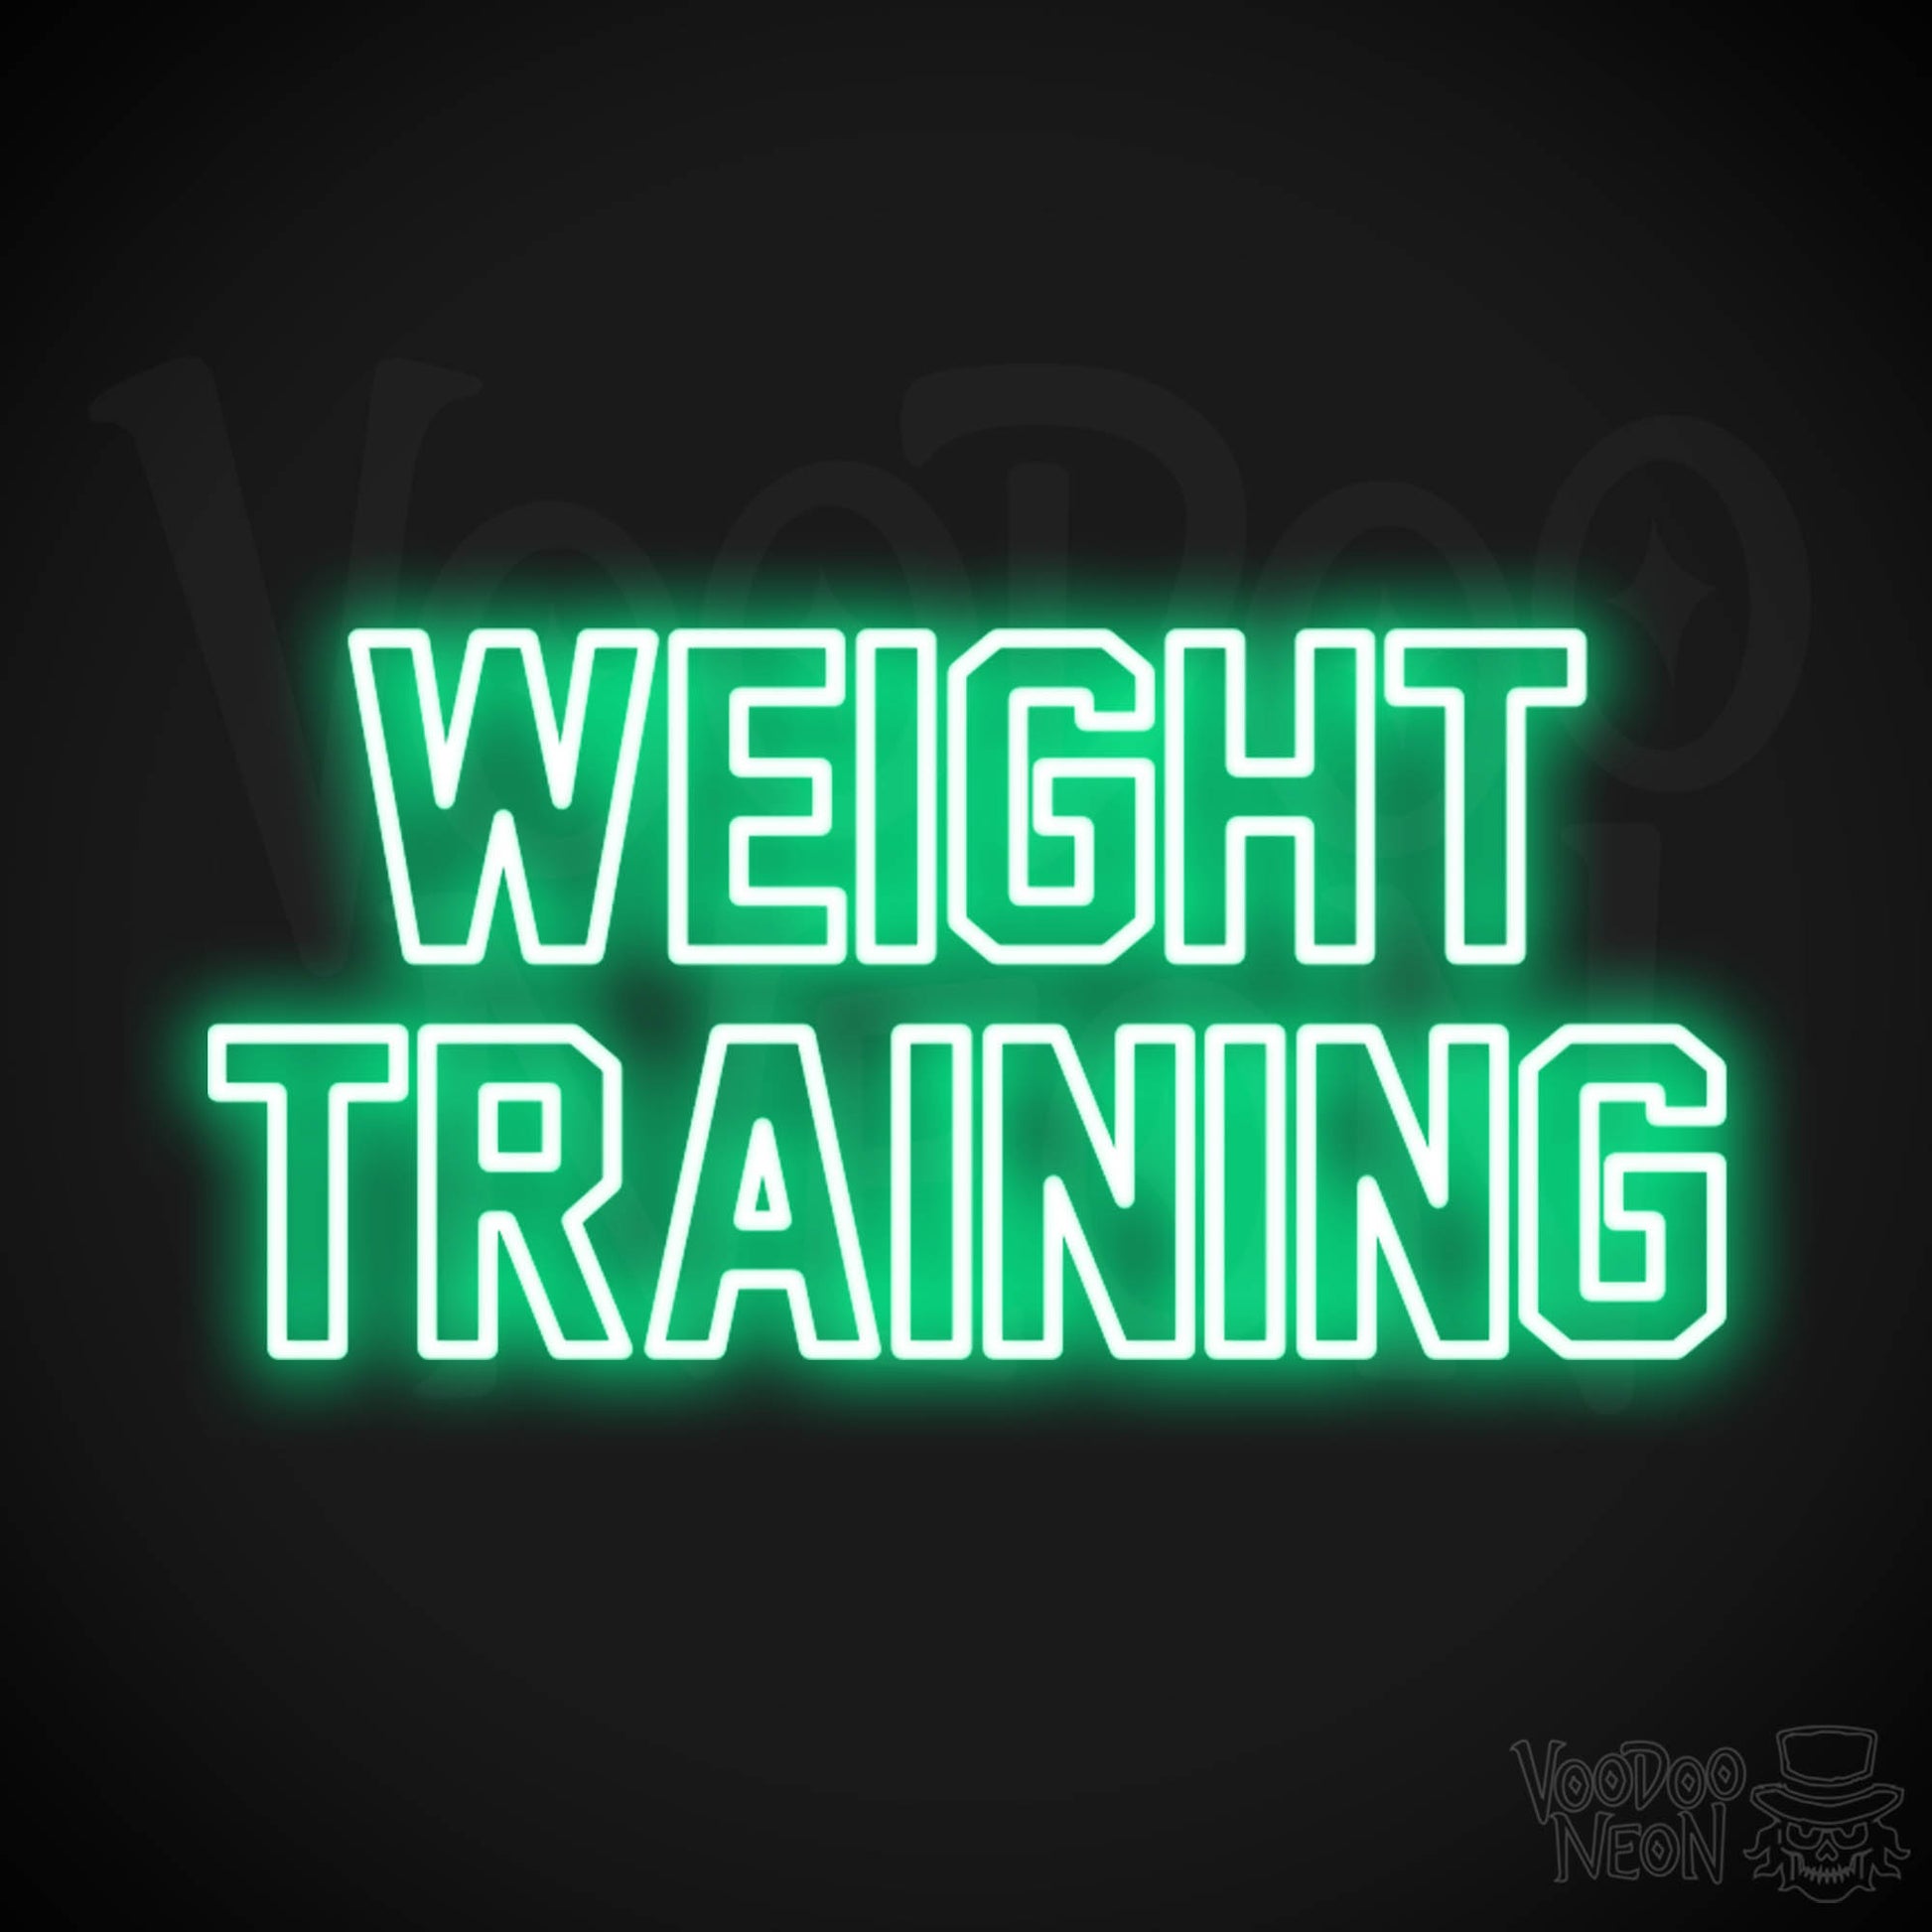 Weight Training LED Neon - Green